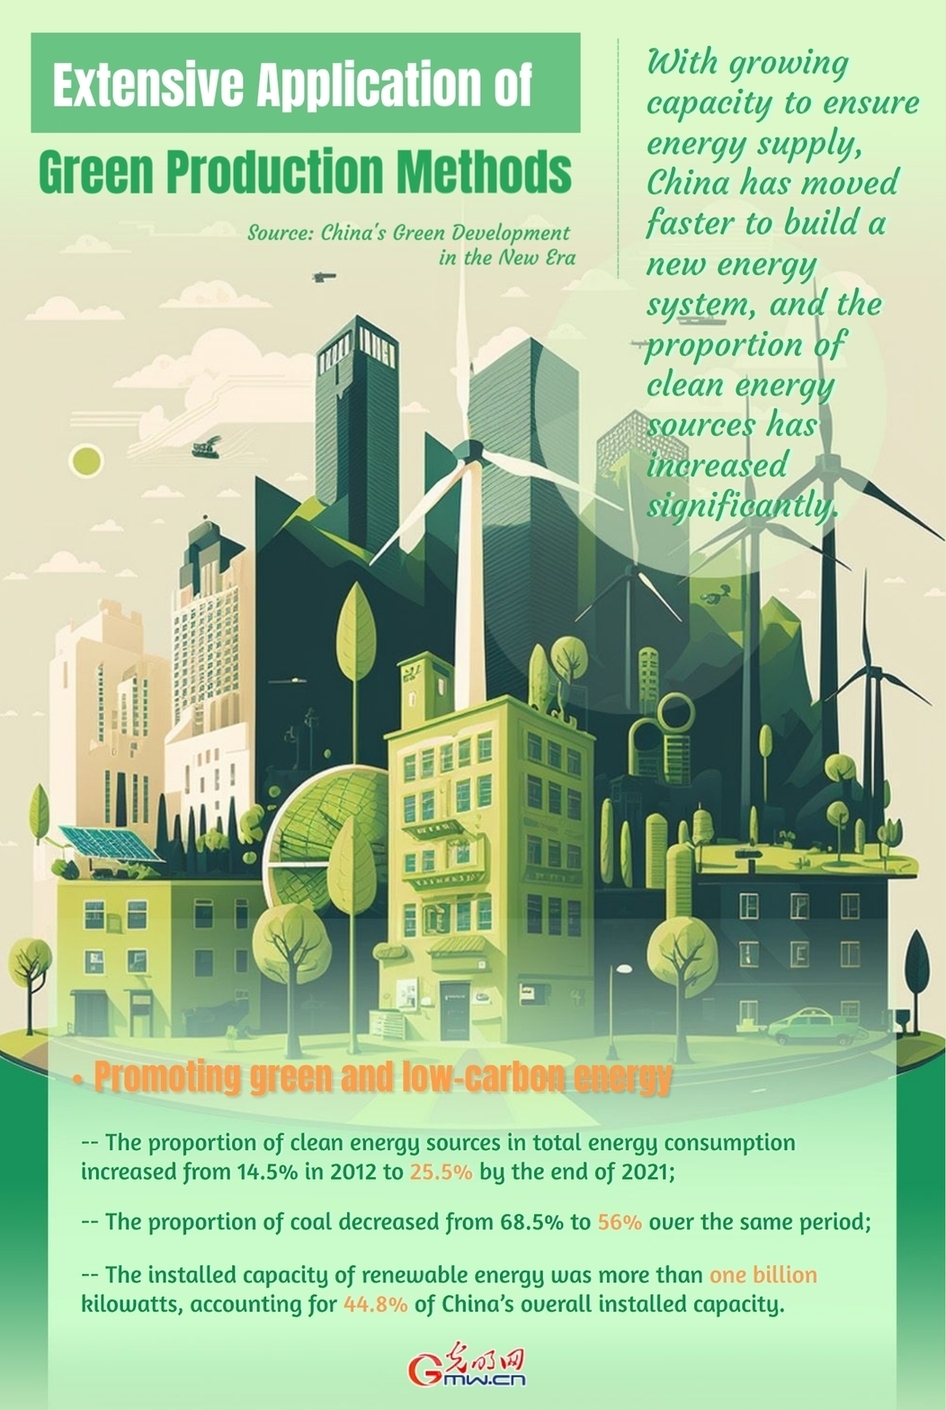 China’s Green Development in the New Era: Extensive Application of Green Production Methods